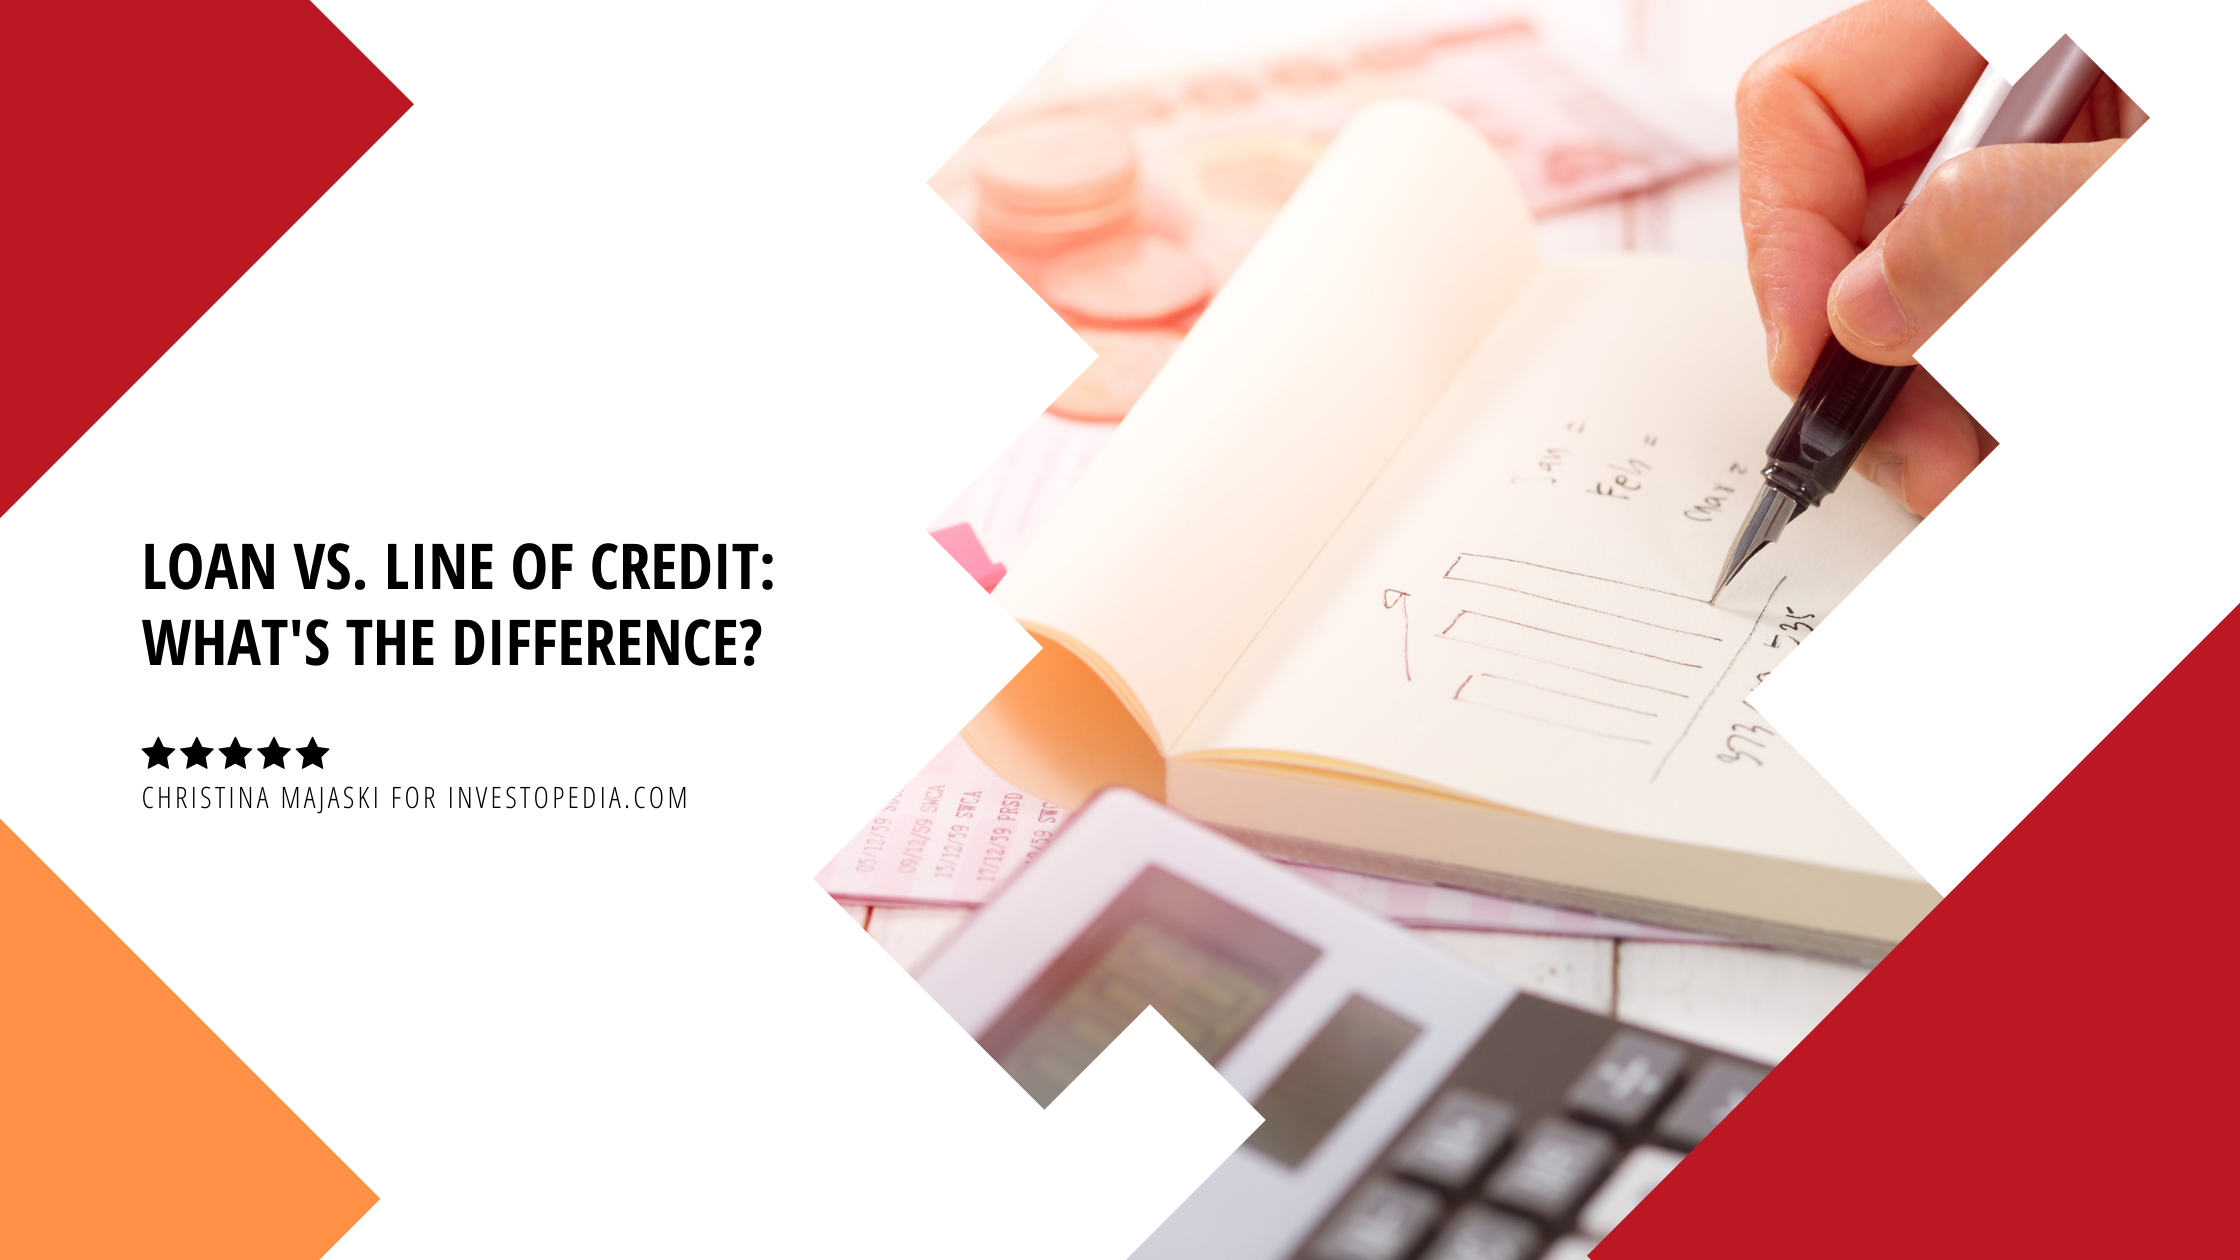 Loan vs. Line of Credit: What's the Difference?